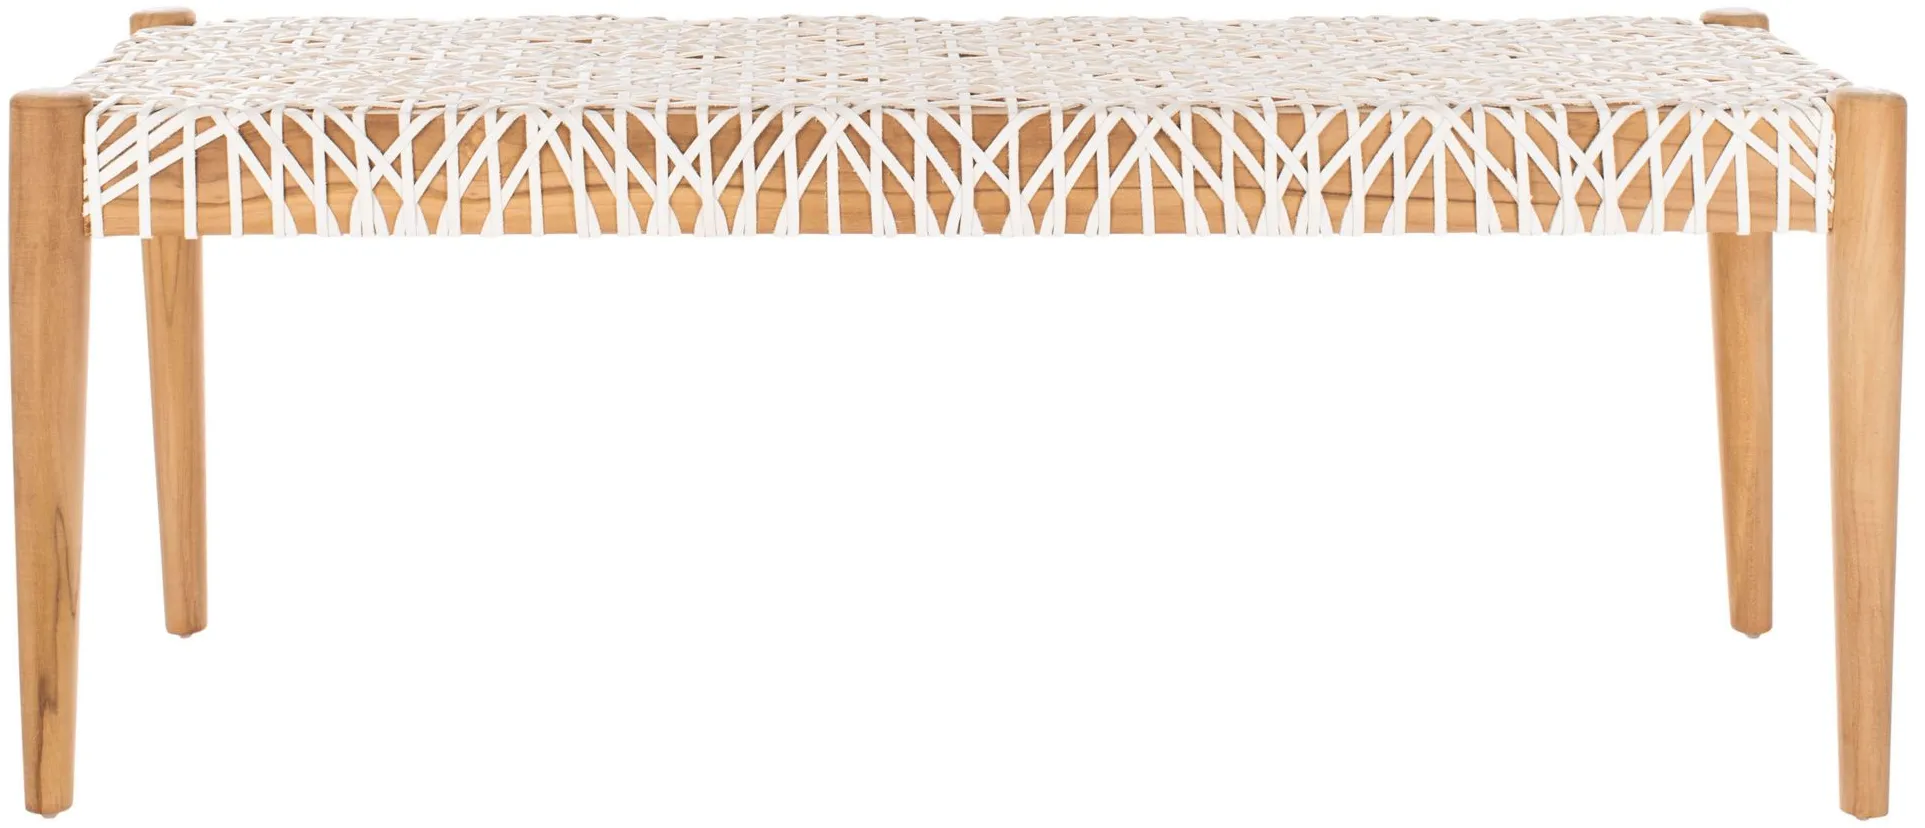 Bandelier Bench in Off White / Natural by Safavieh